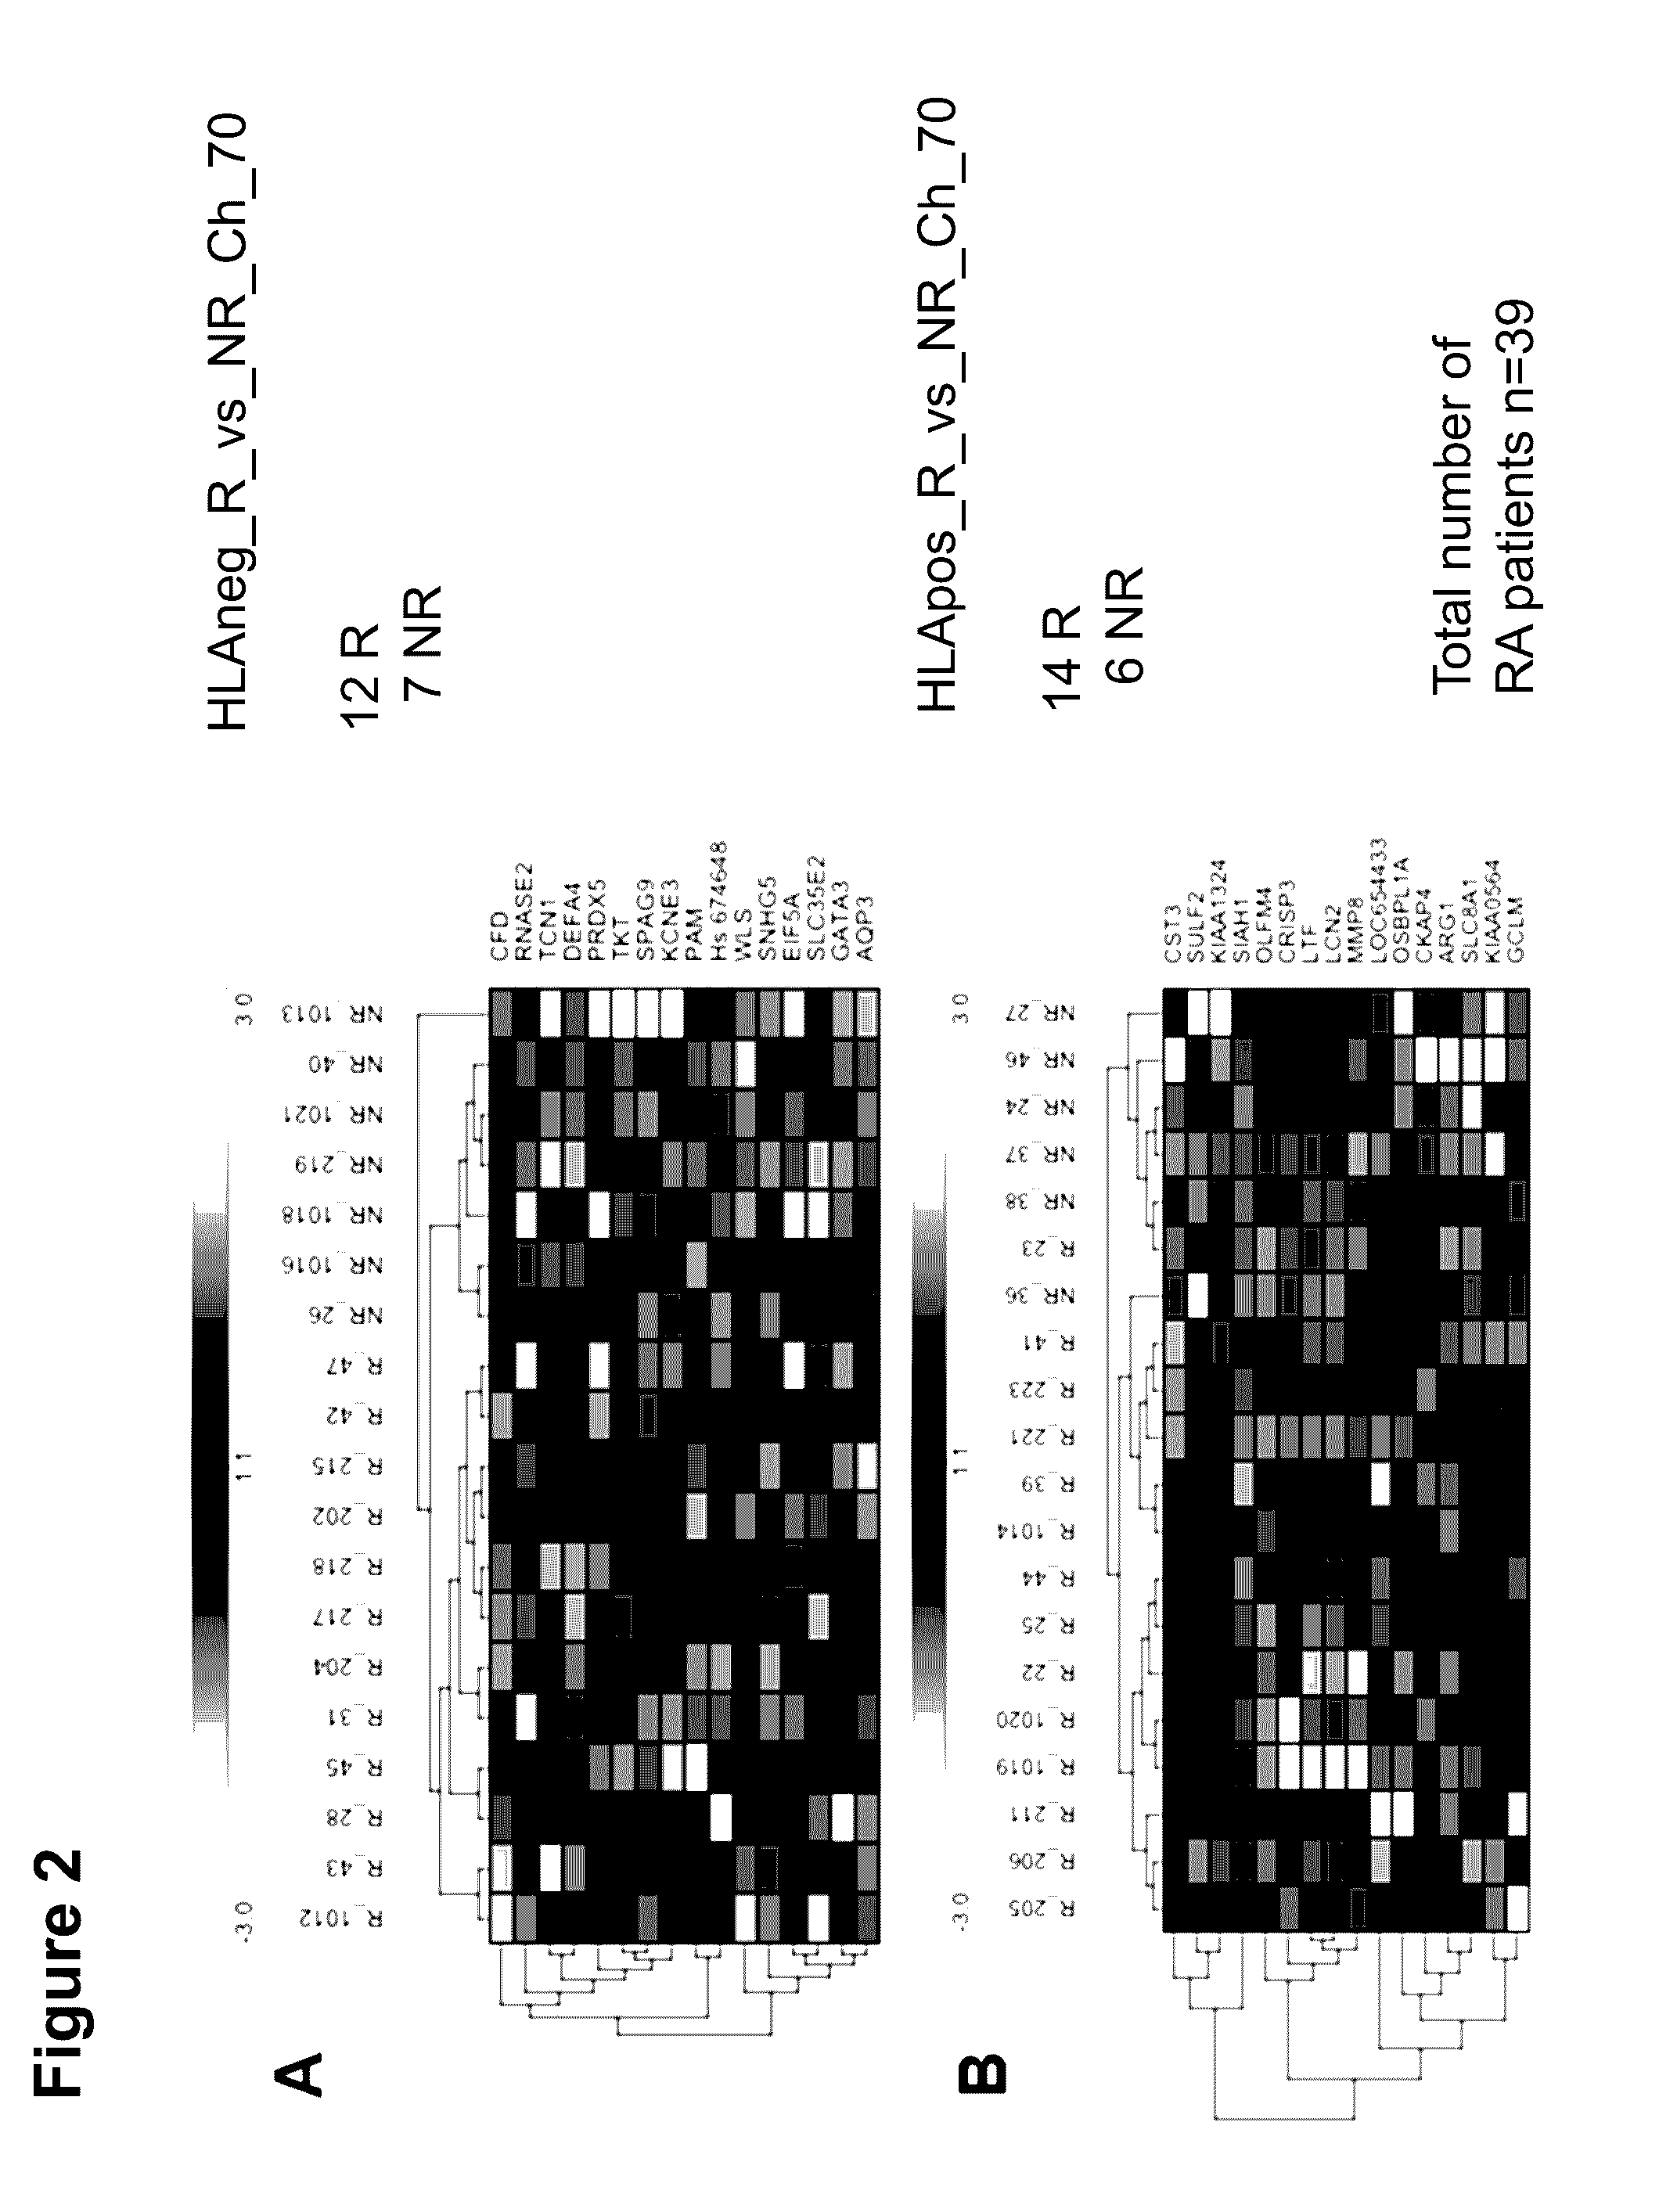 Predictive mRNA Biomarkers for the Prediction of the Treatment with Methotrexate (MTX)